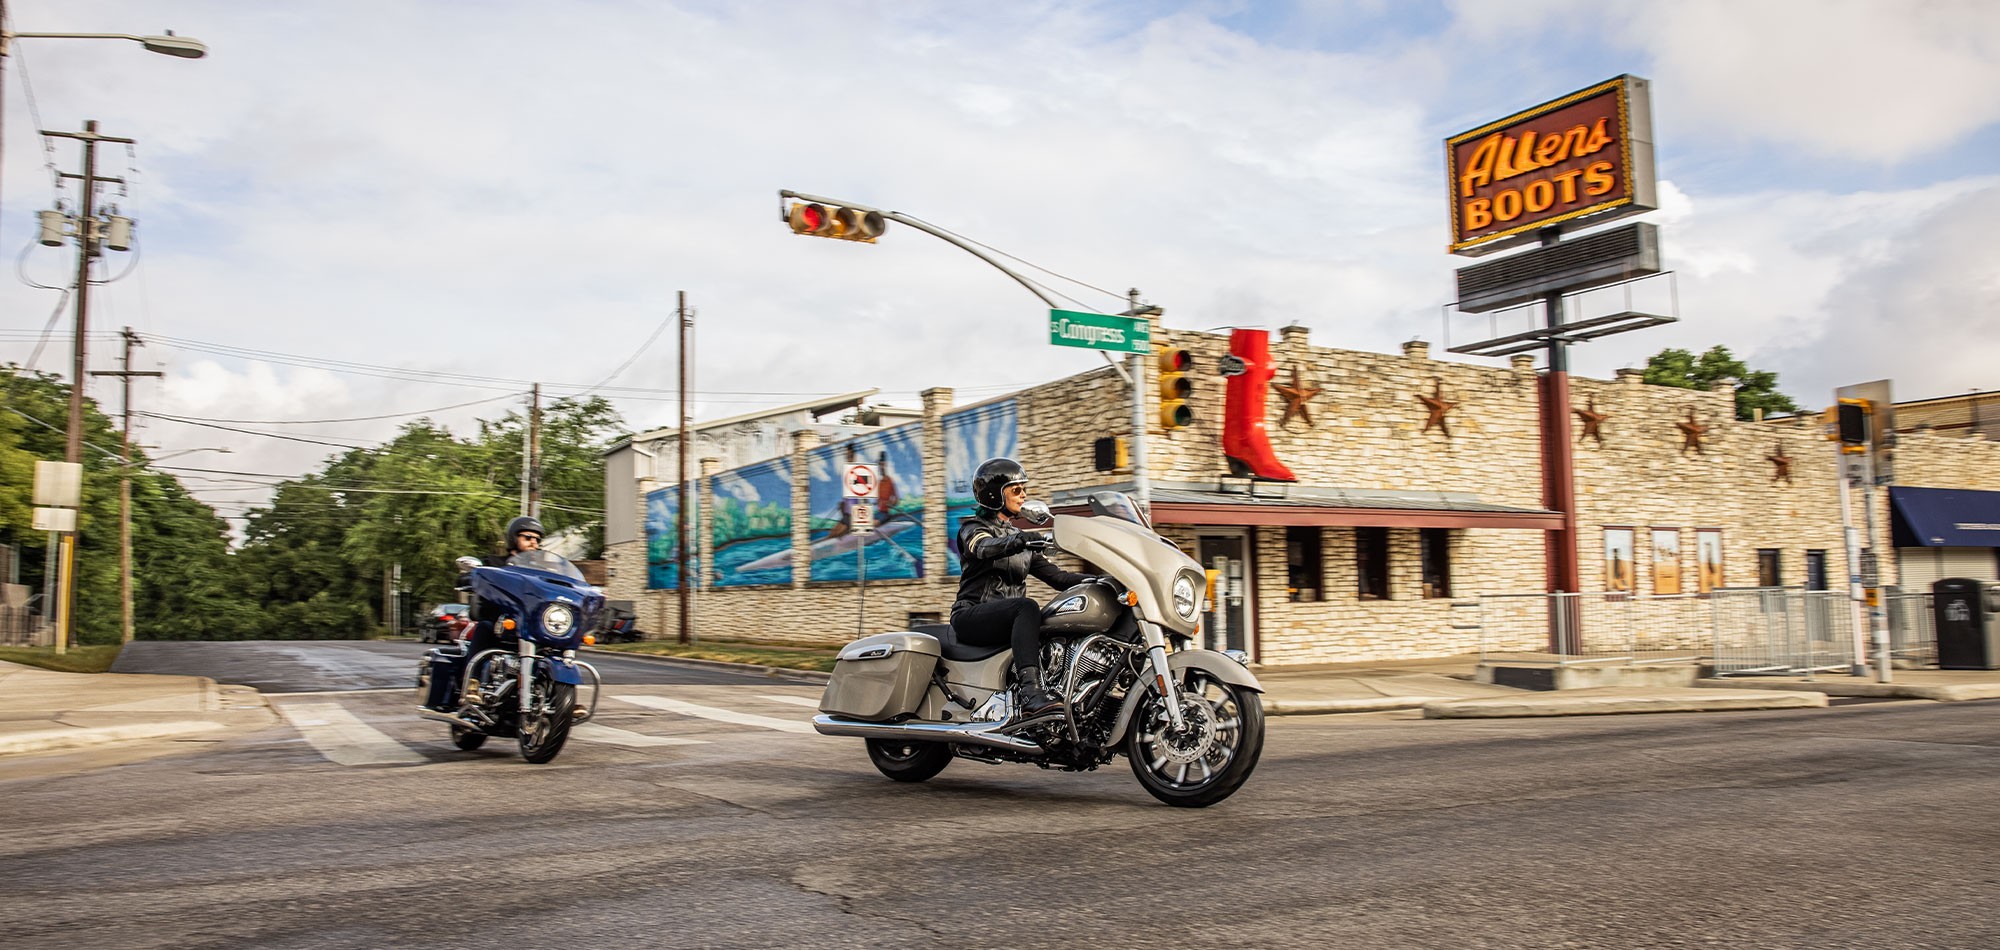 Action Image of two Indian Chieftain Limited motorcycles entering an intersection